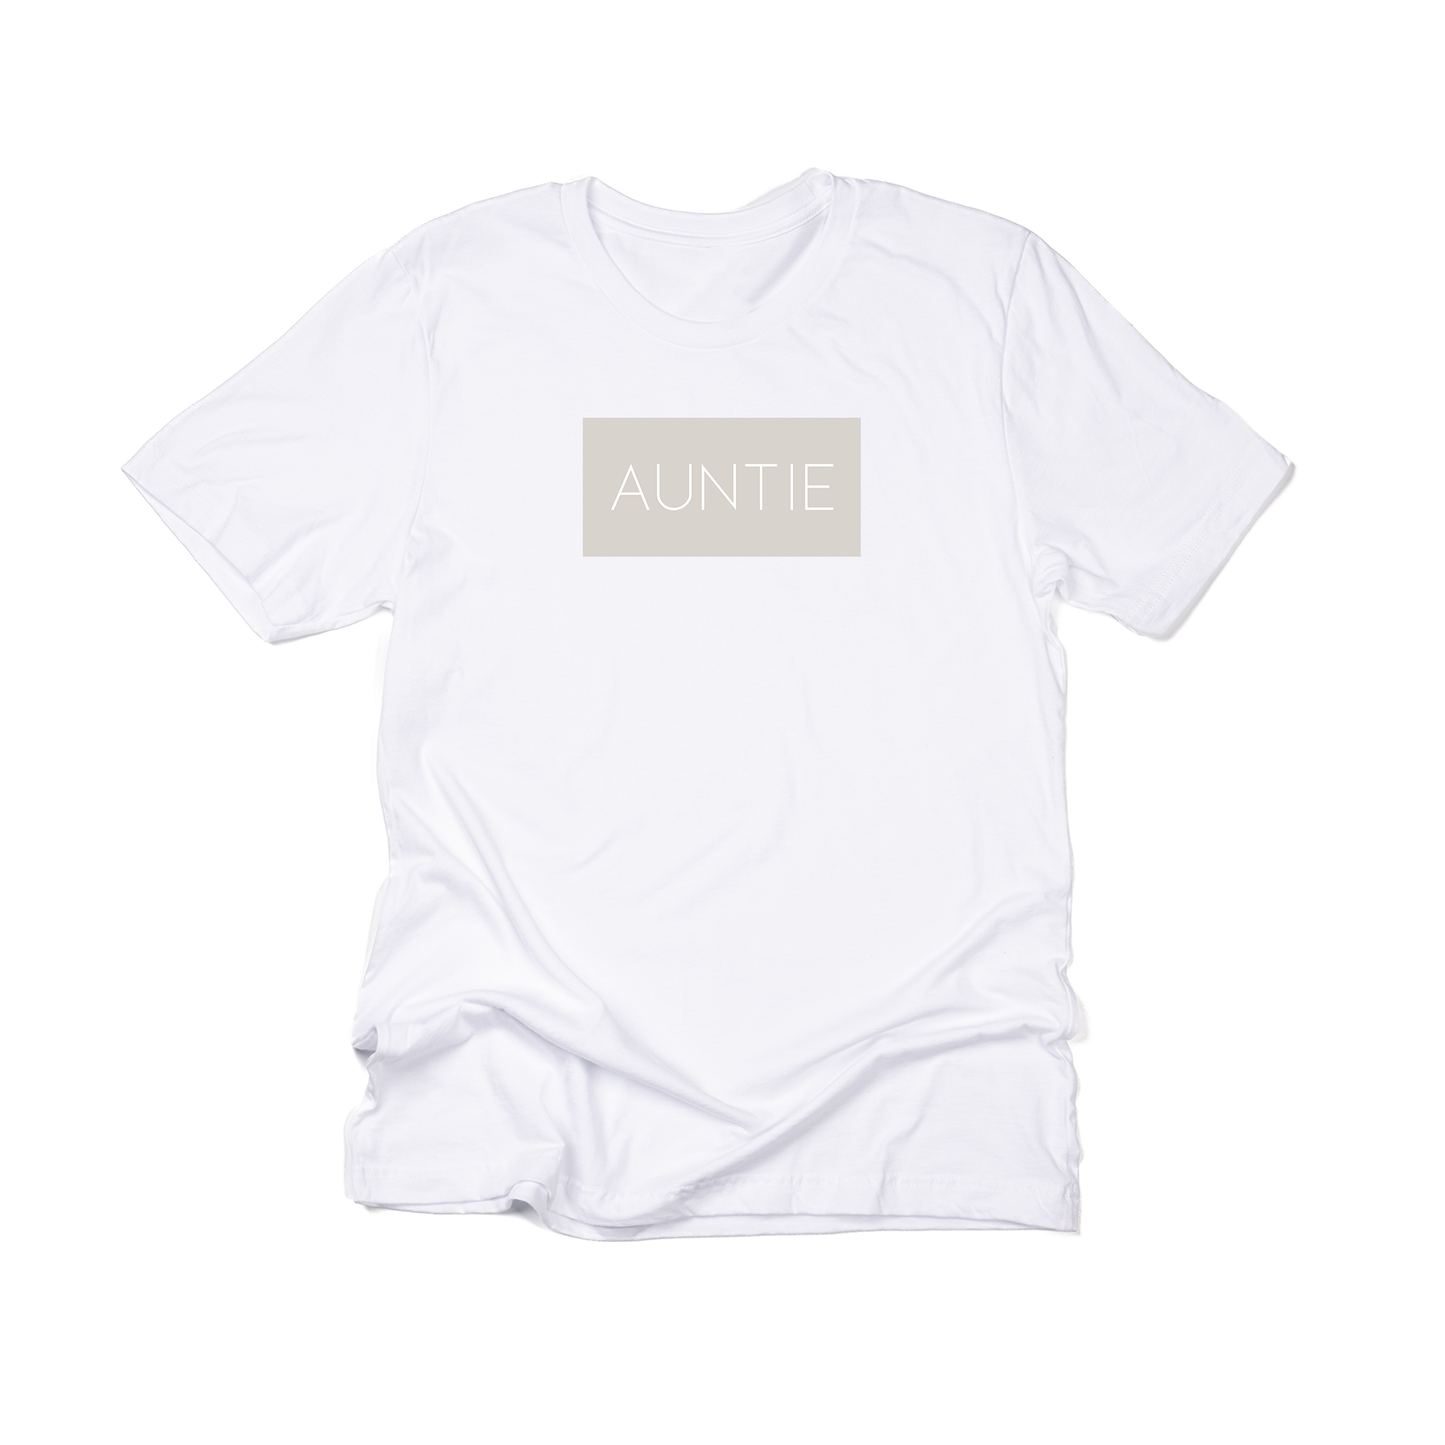 Auntie (Boxed Collection, Stone Box/White Text, Across Front) - Tee (White)